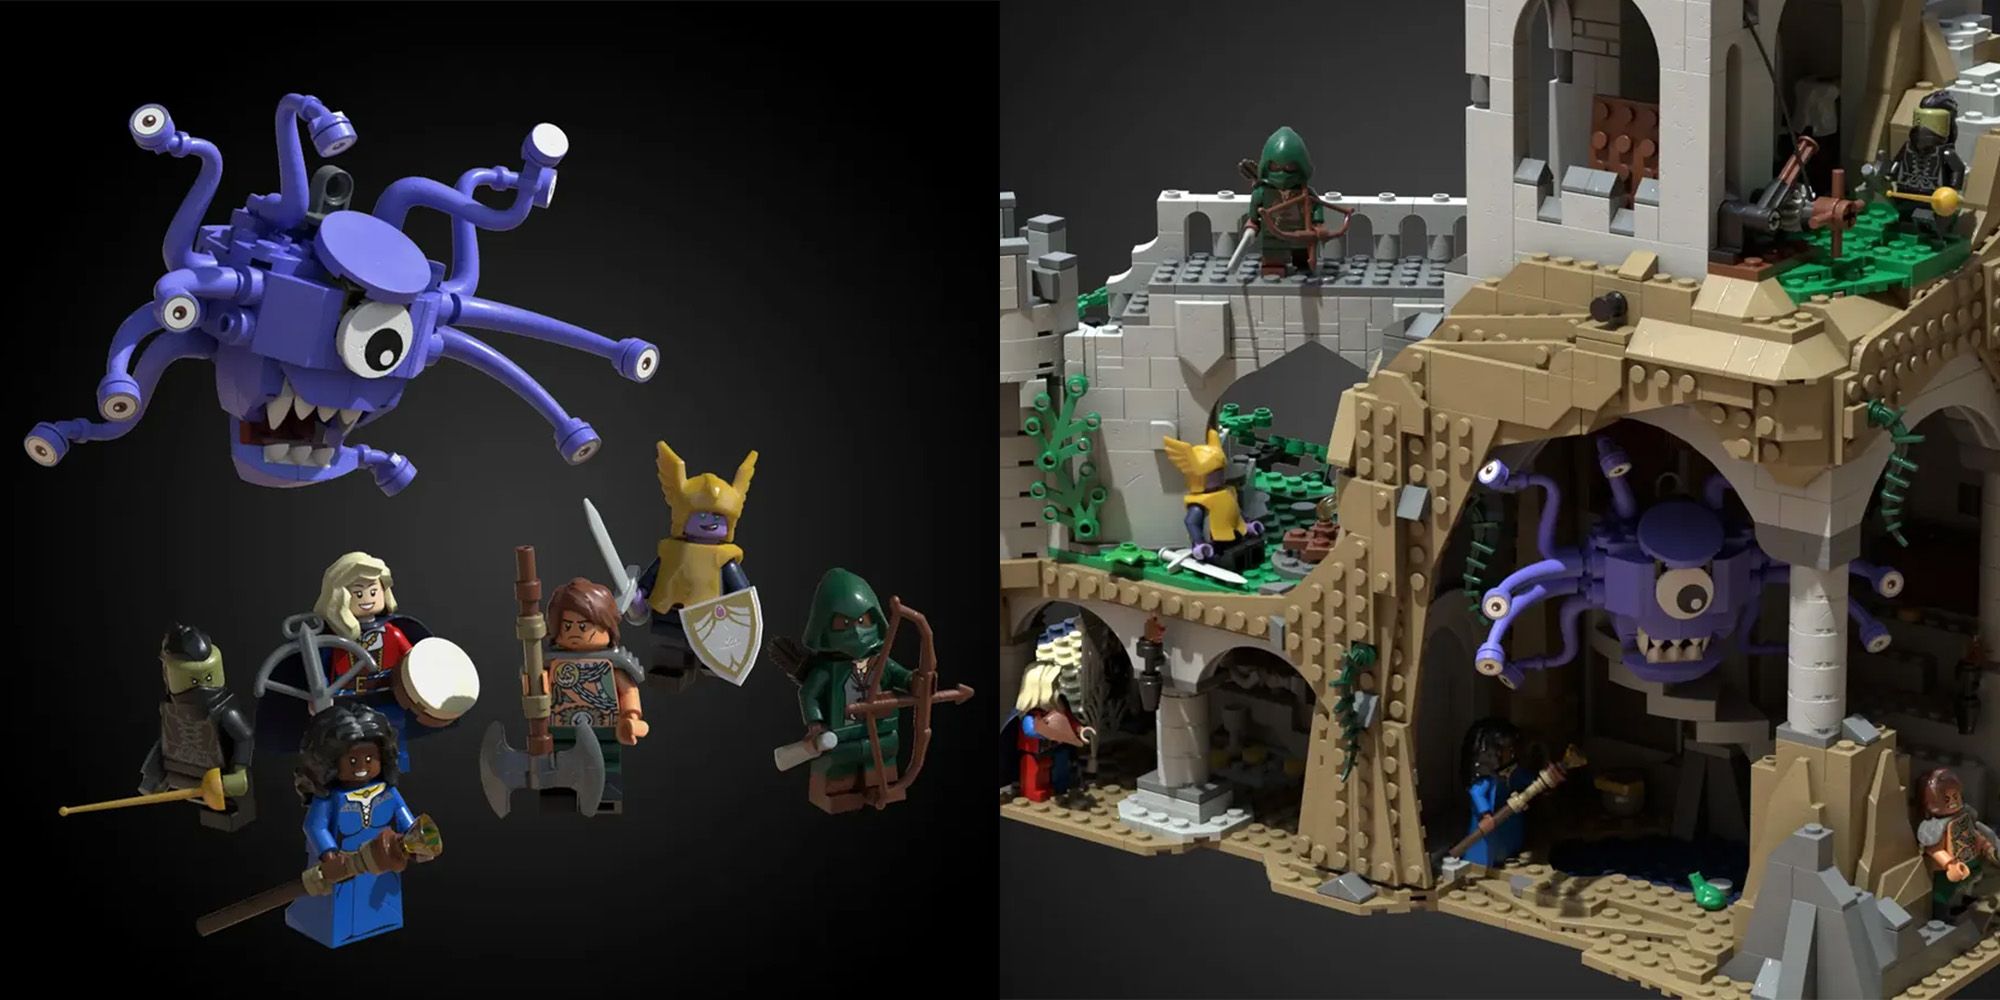 Left image shows LEGO D&D party and a beholder, right image shows the same minifigs fighting in the set's dungeon.